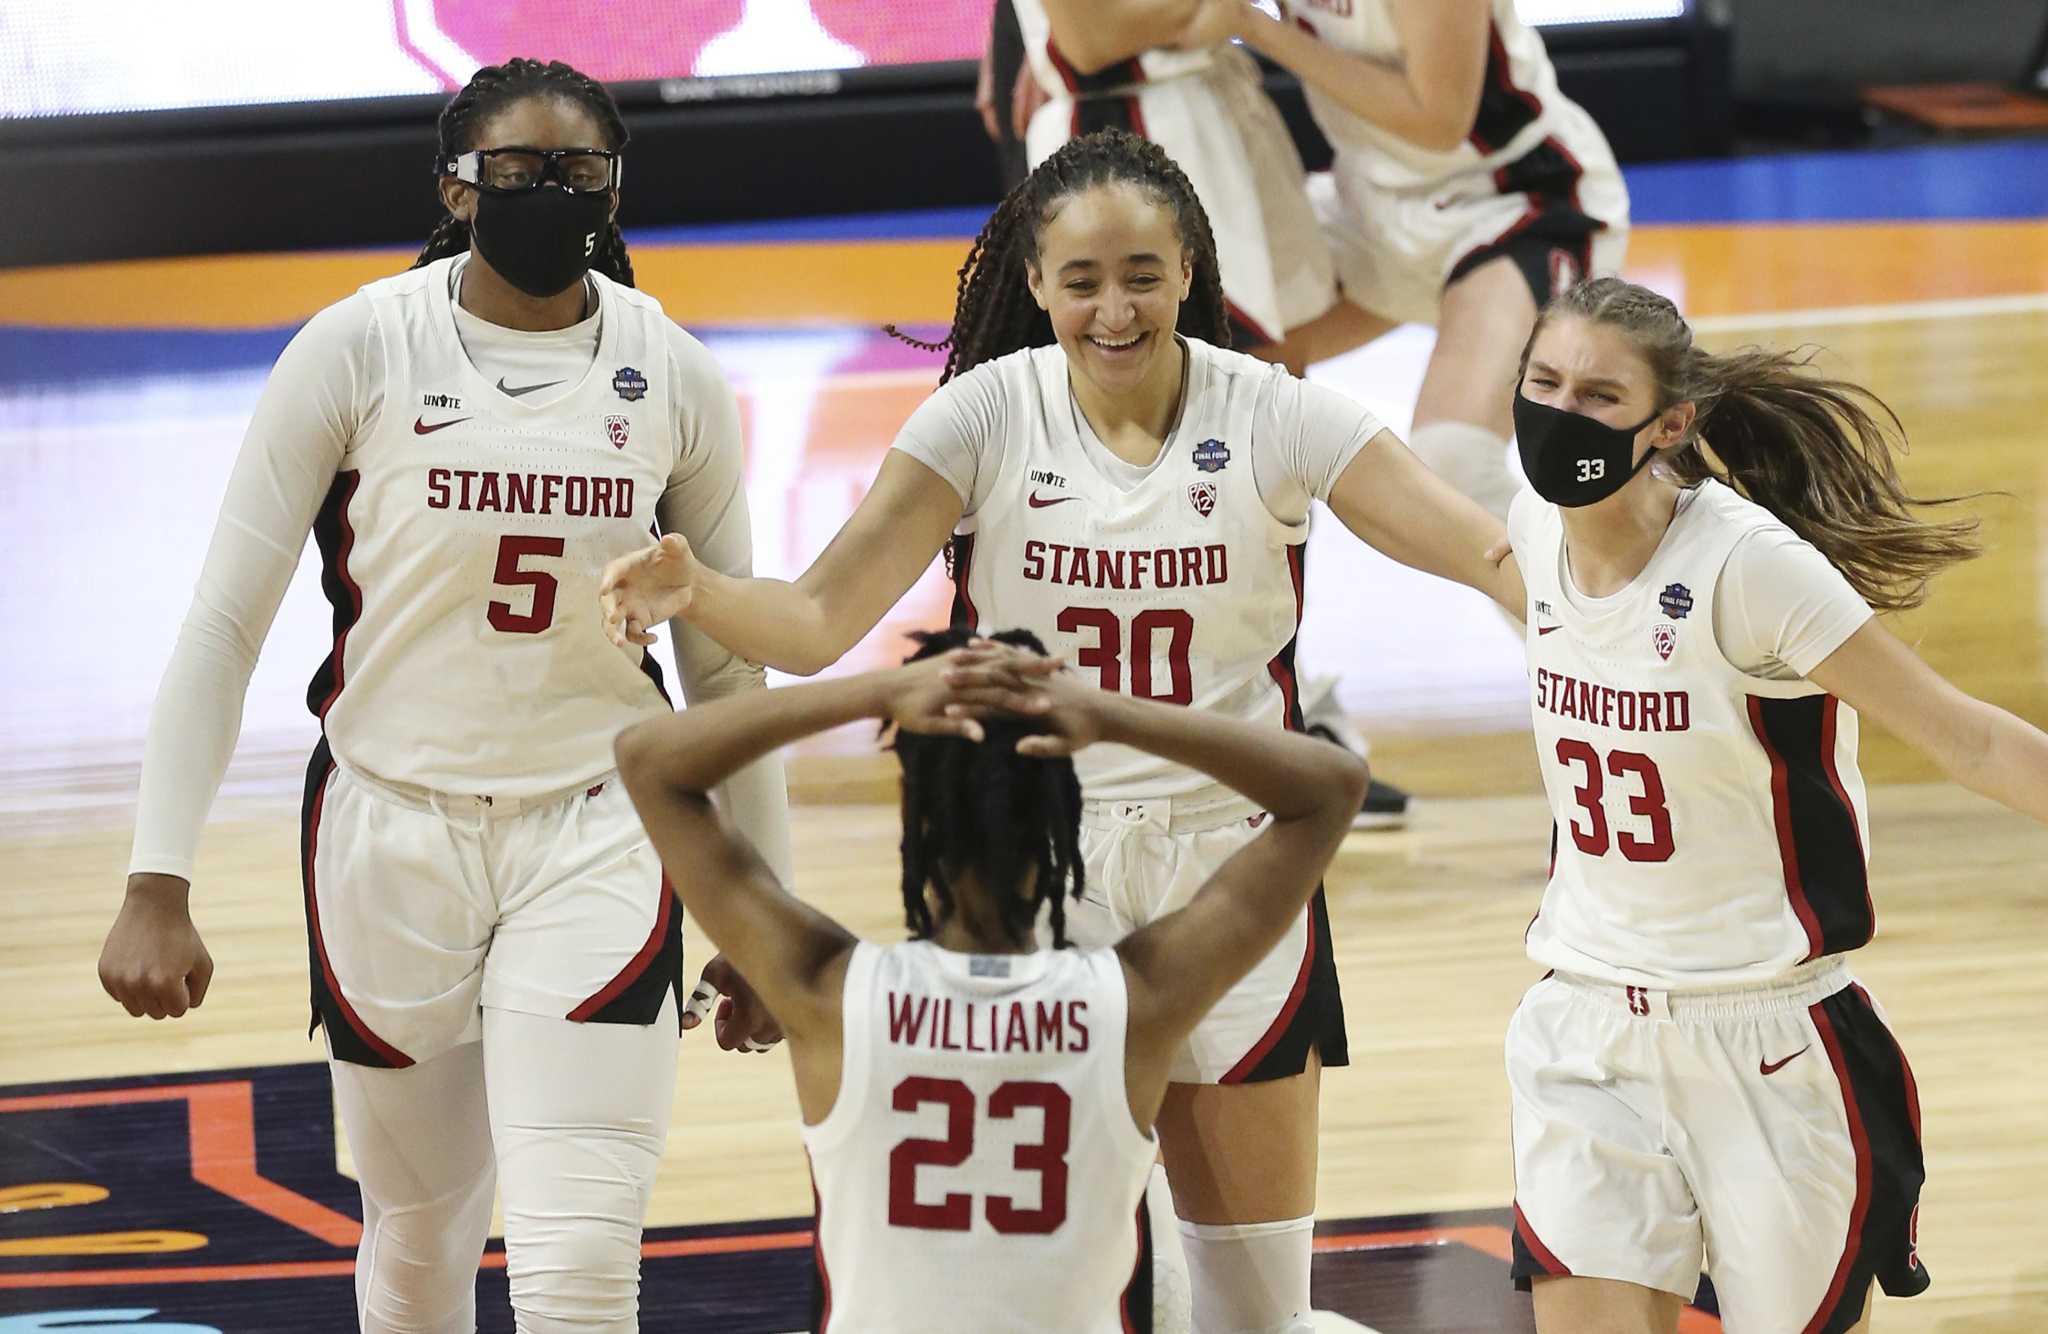 Stanford survives late South Carolina pressure to advance to national title game